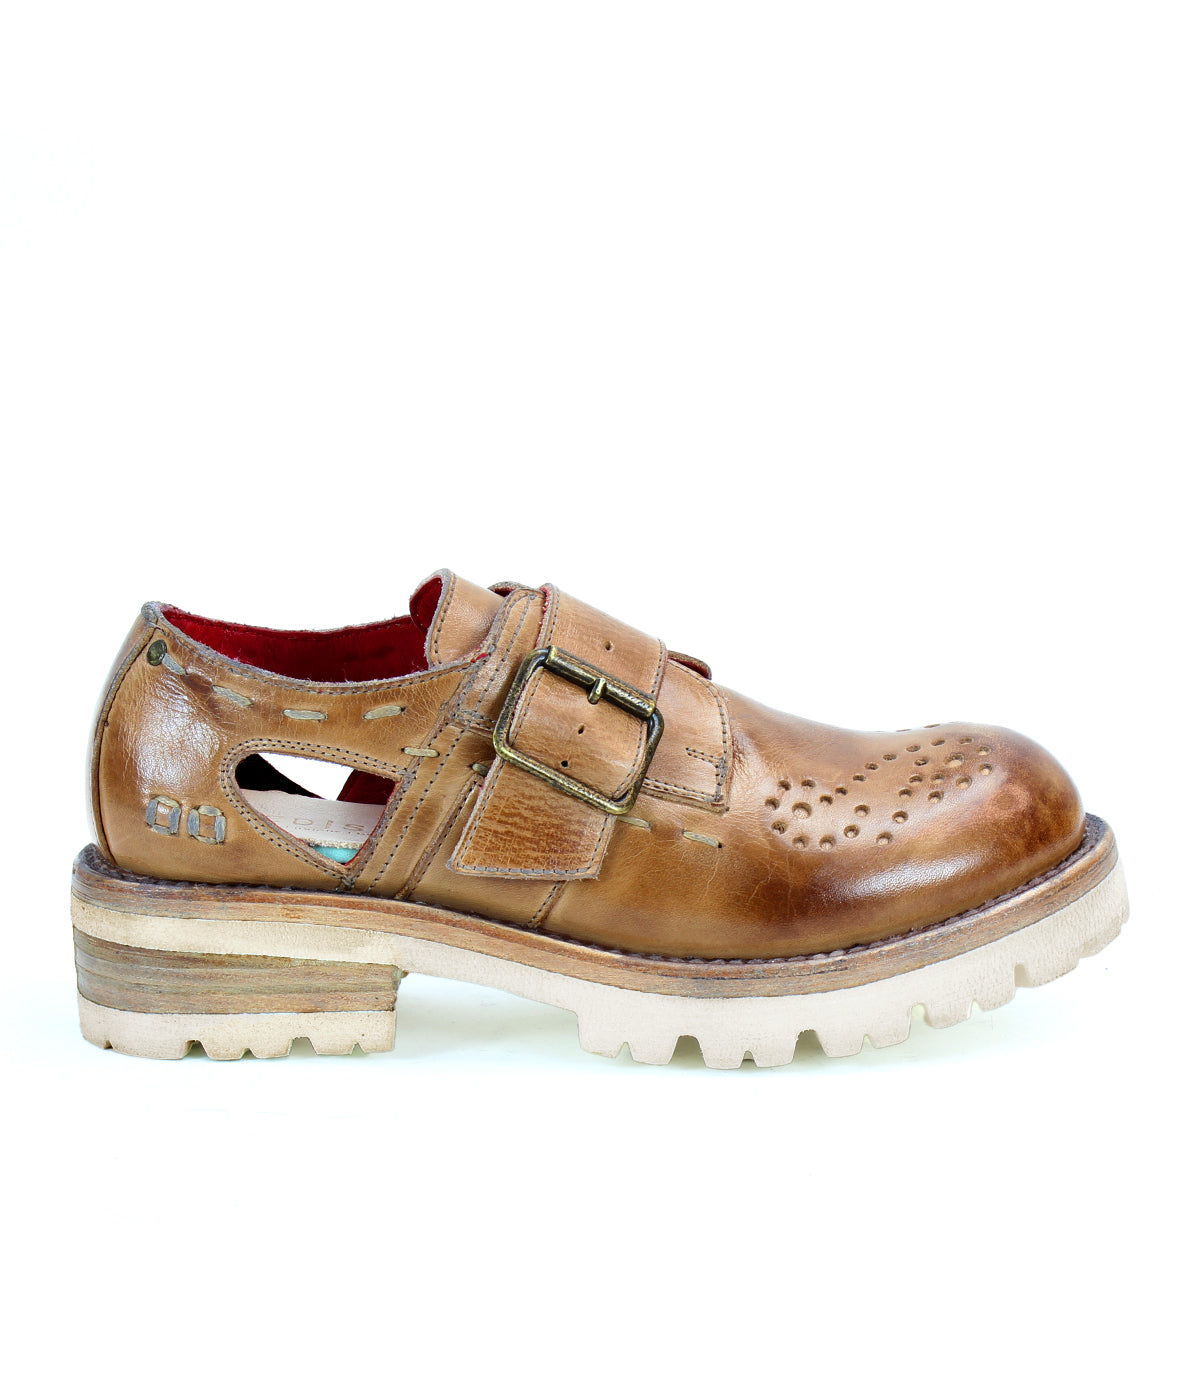 A men's brown leather shoe with buckles and perforated detail by Bed Stu Dagny.